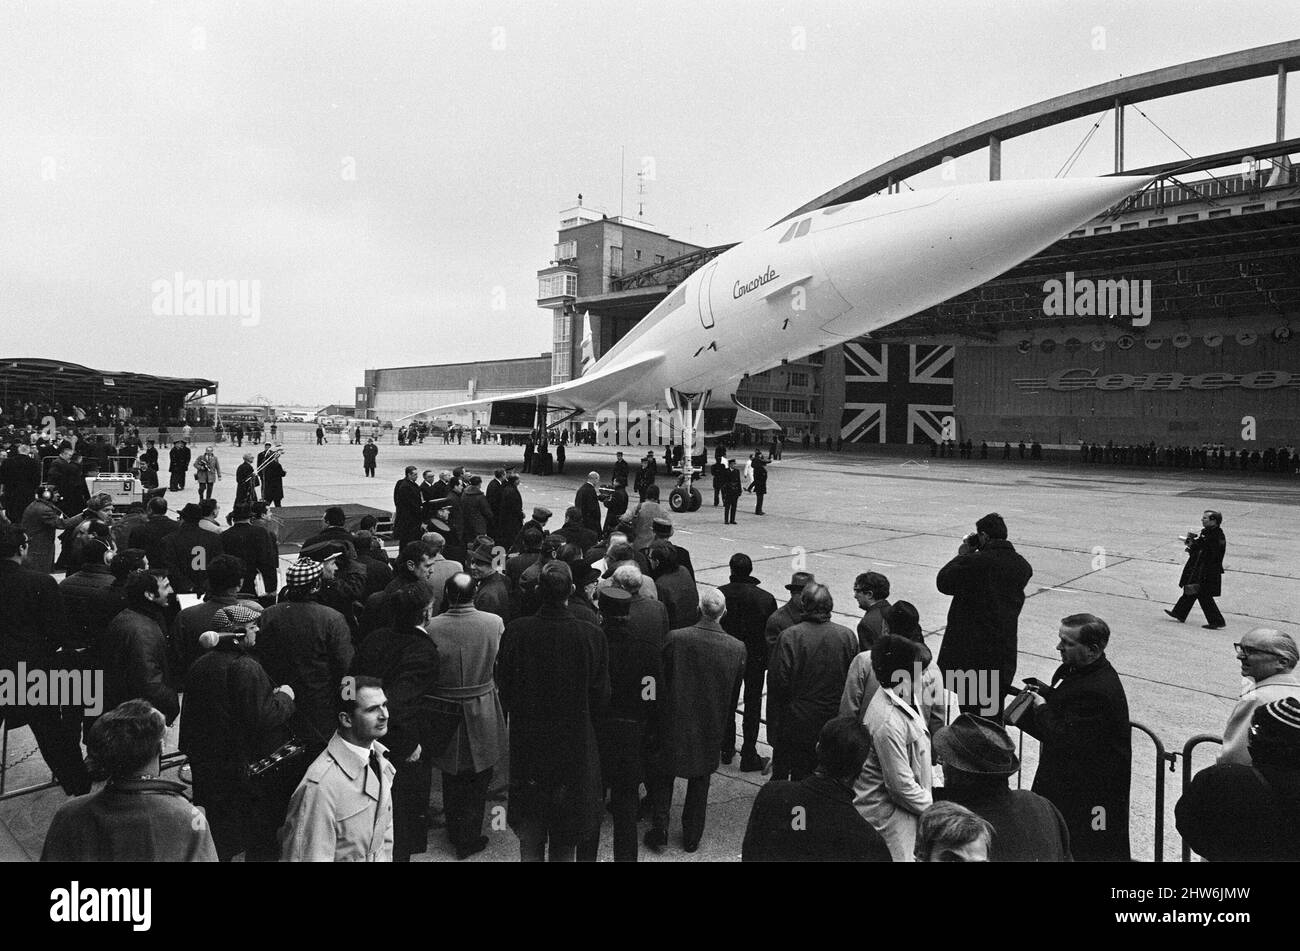 Concorde, prototype 001 makes its first official public appearance as it is unveiled from its Sud Aviation's hanger in Toulouse, France, Monday 11th December 1967. Stock Photo